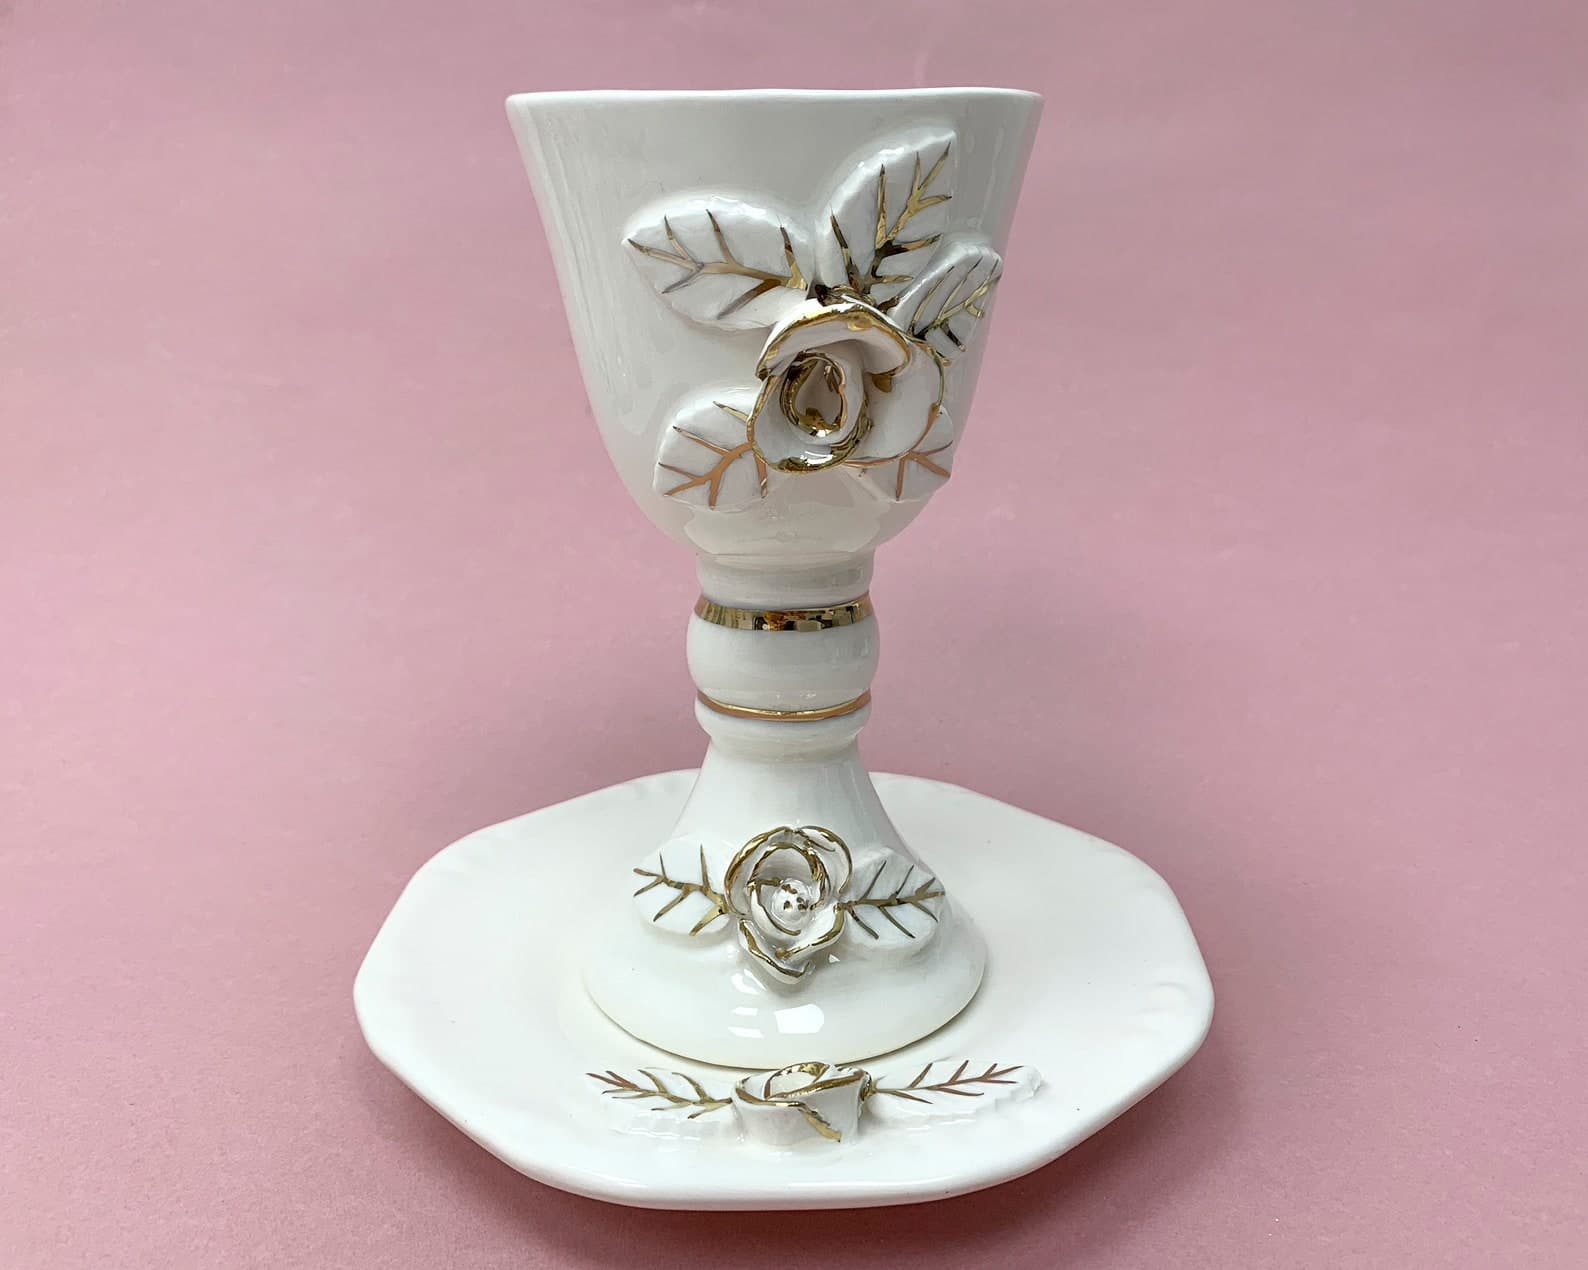 Ceramic Kiddush Cup and Plate